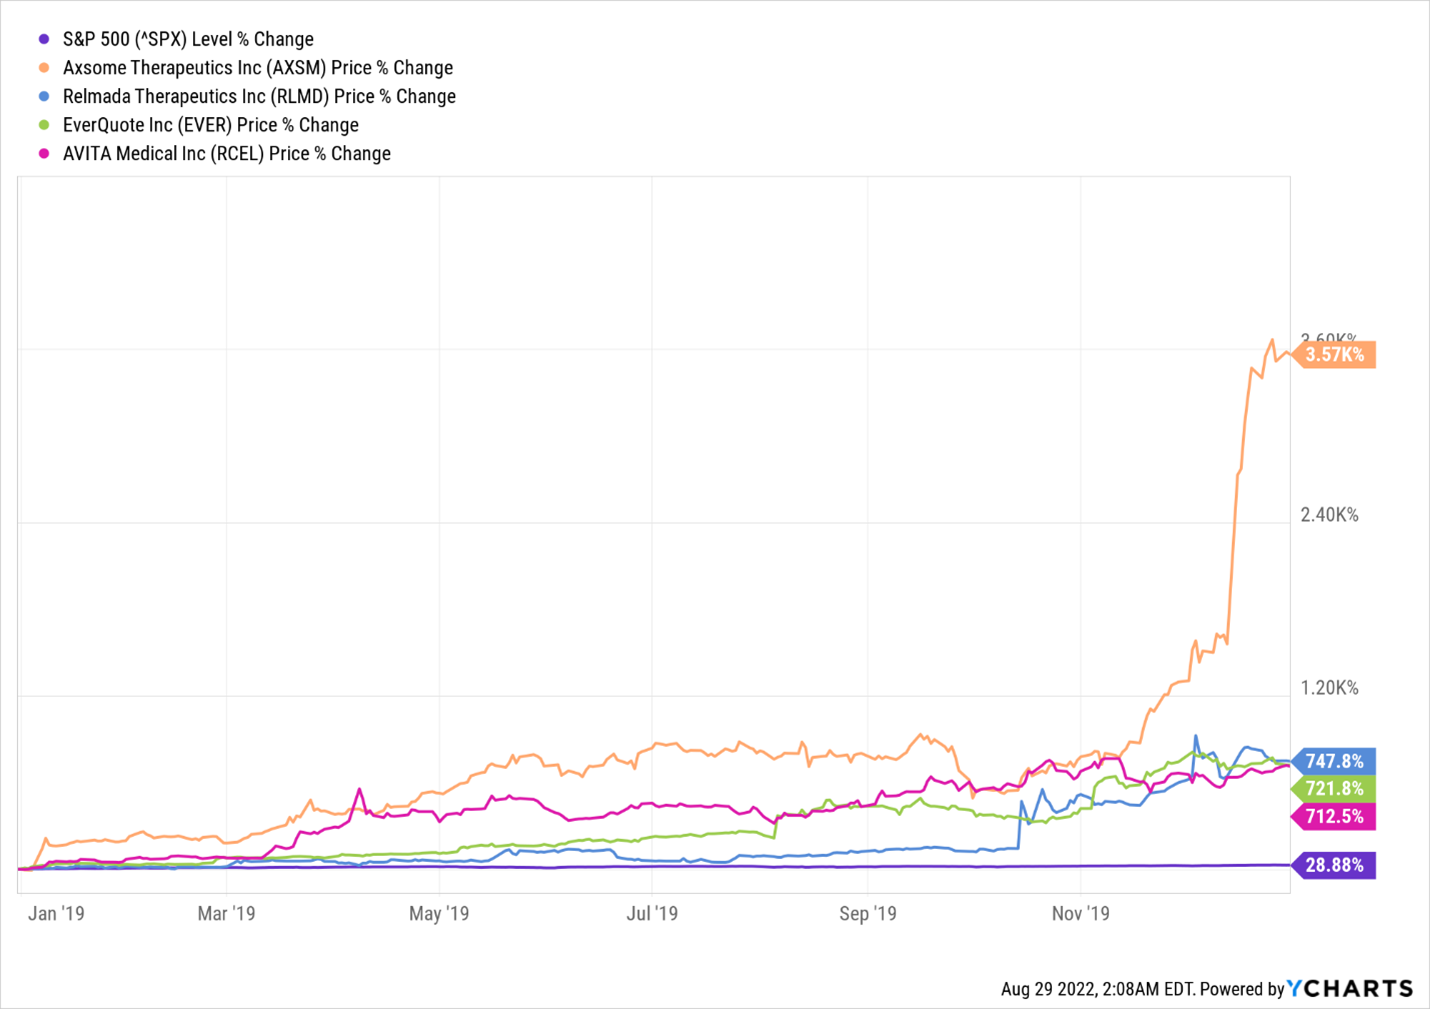 a chart that tracks the S&P 500's level % change against Axsome Therapeutics' price % change, Relmada Therapeutics' price % change, EverQuote's price % change, and AVITA's price % change from January 2019 to December 2019